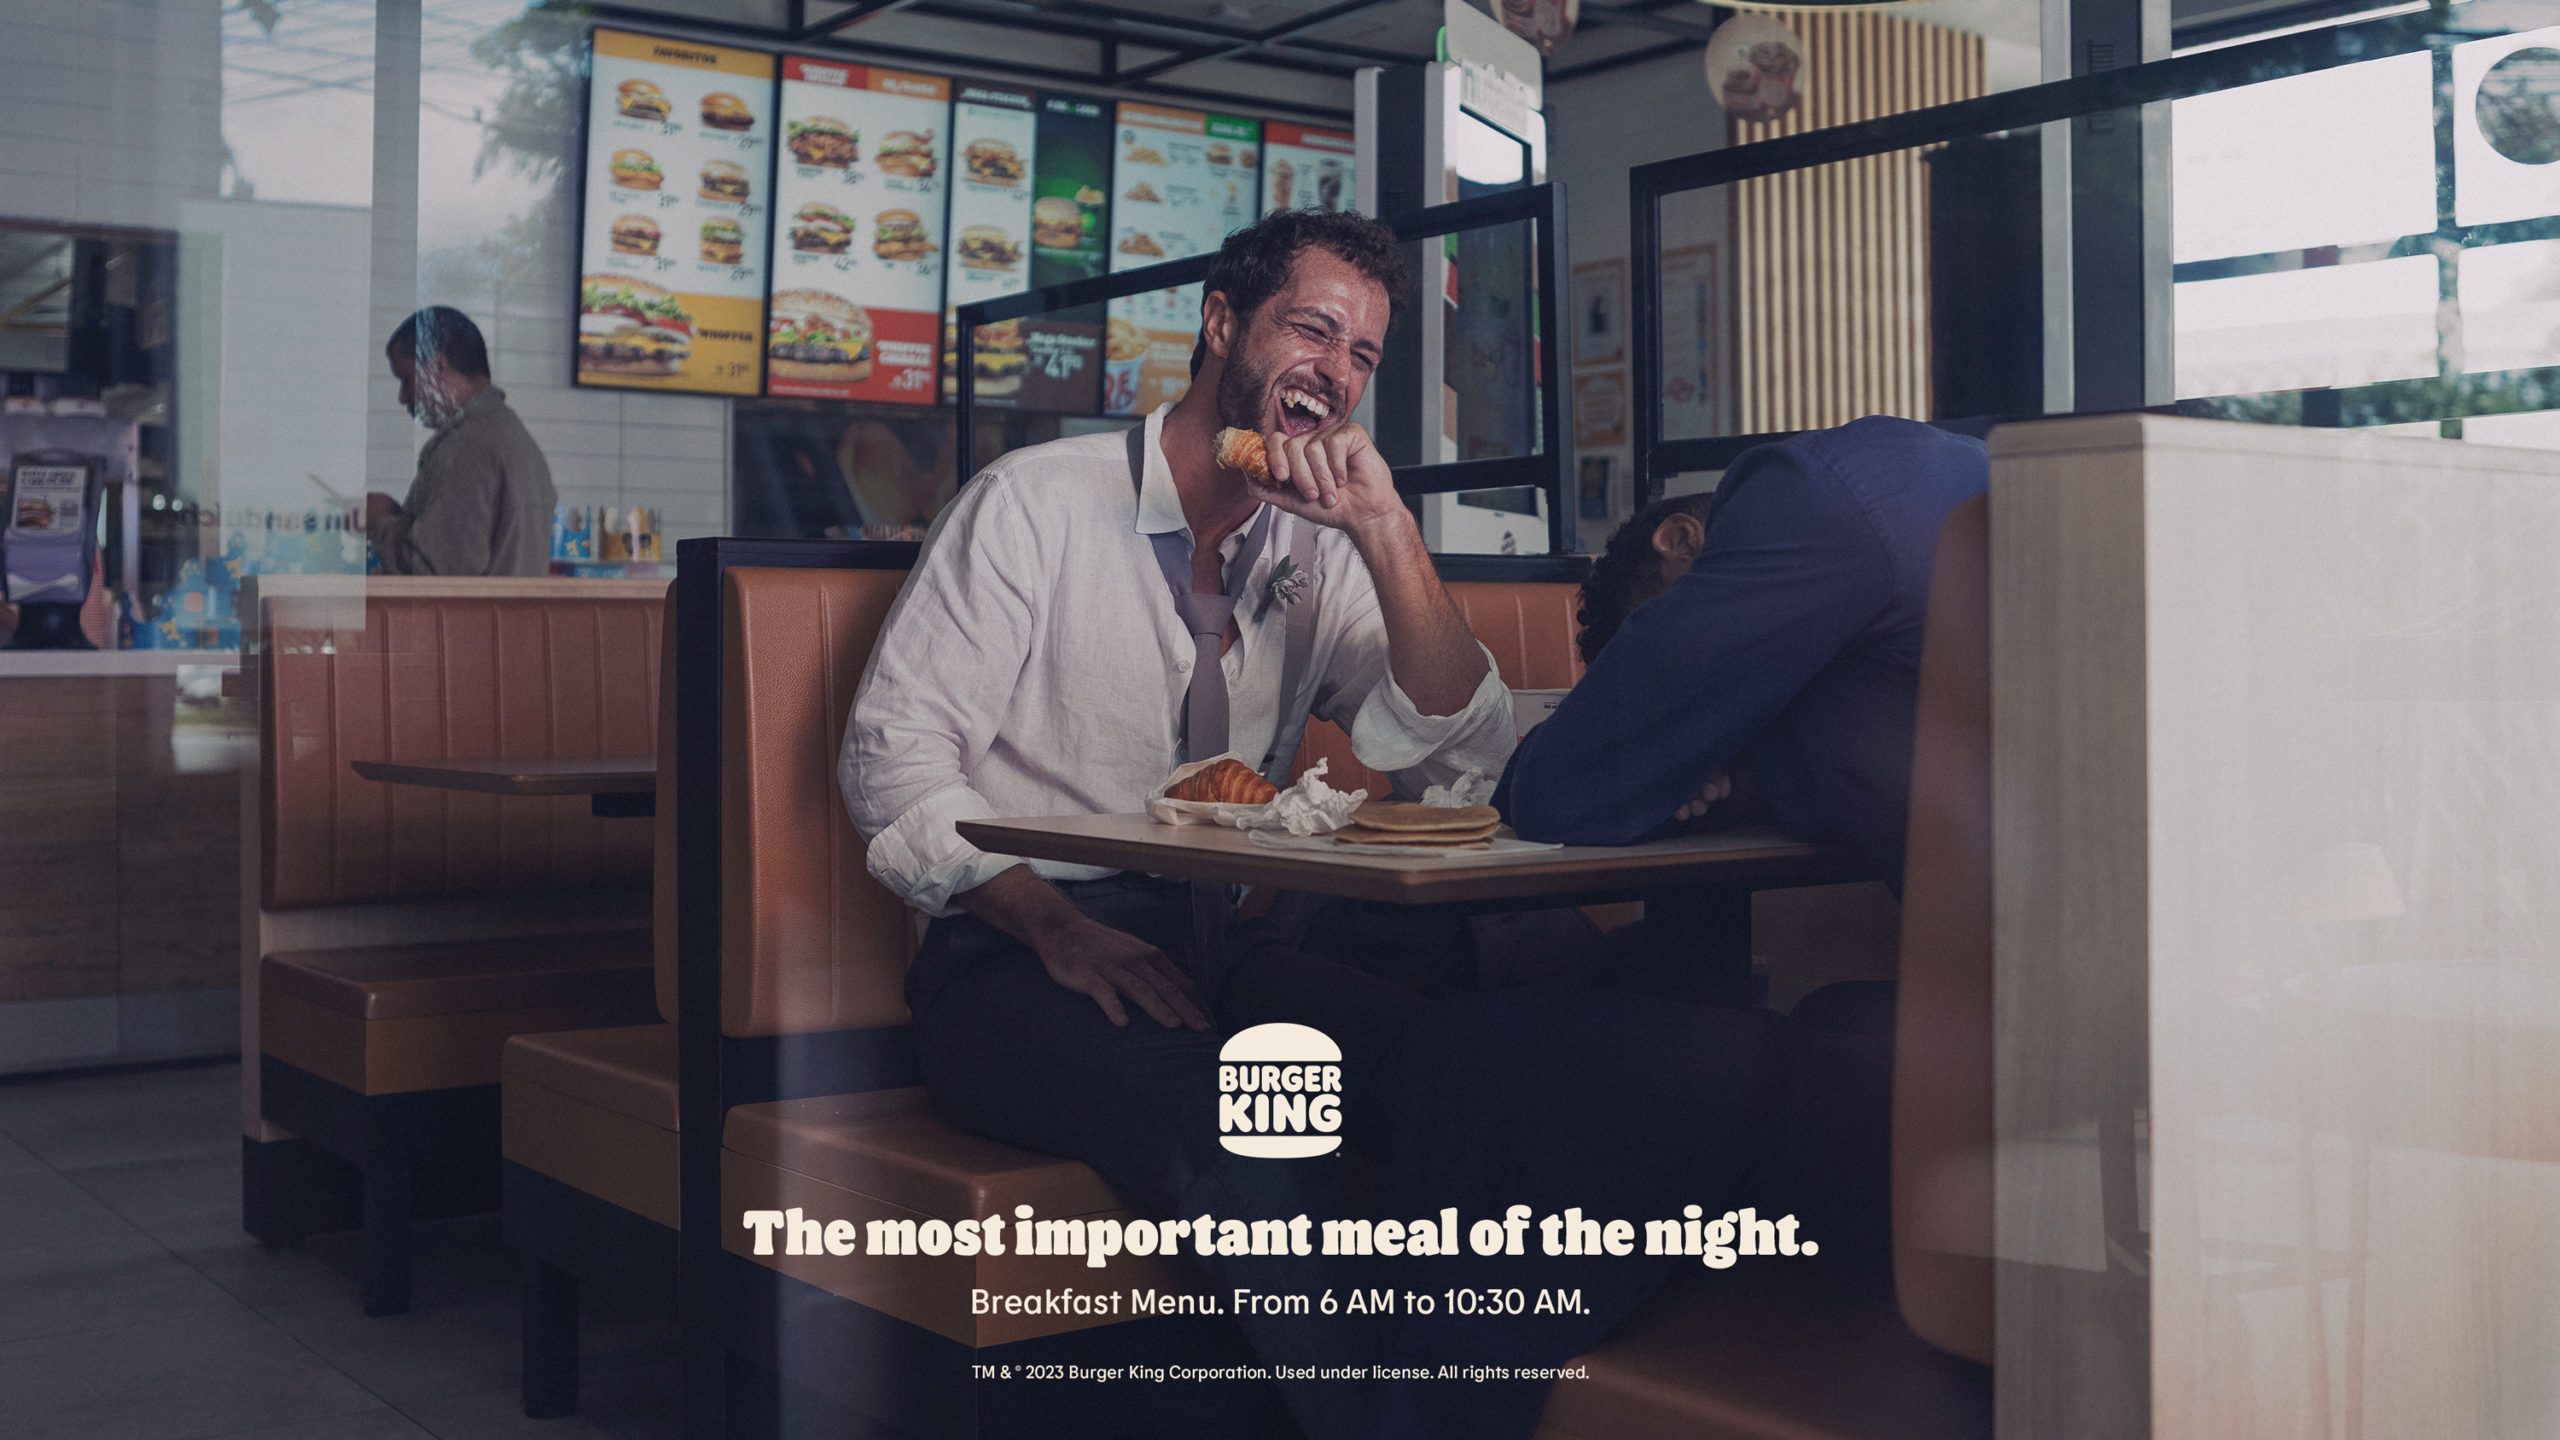 Burger King asserts “The Most Important Meal of the Night” in campaign